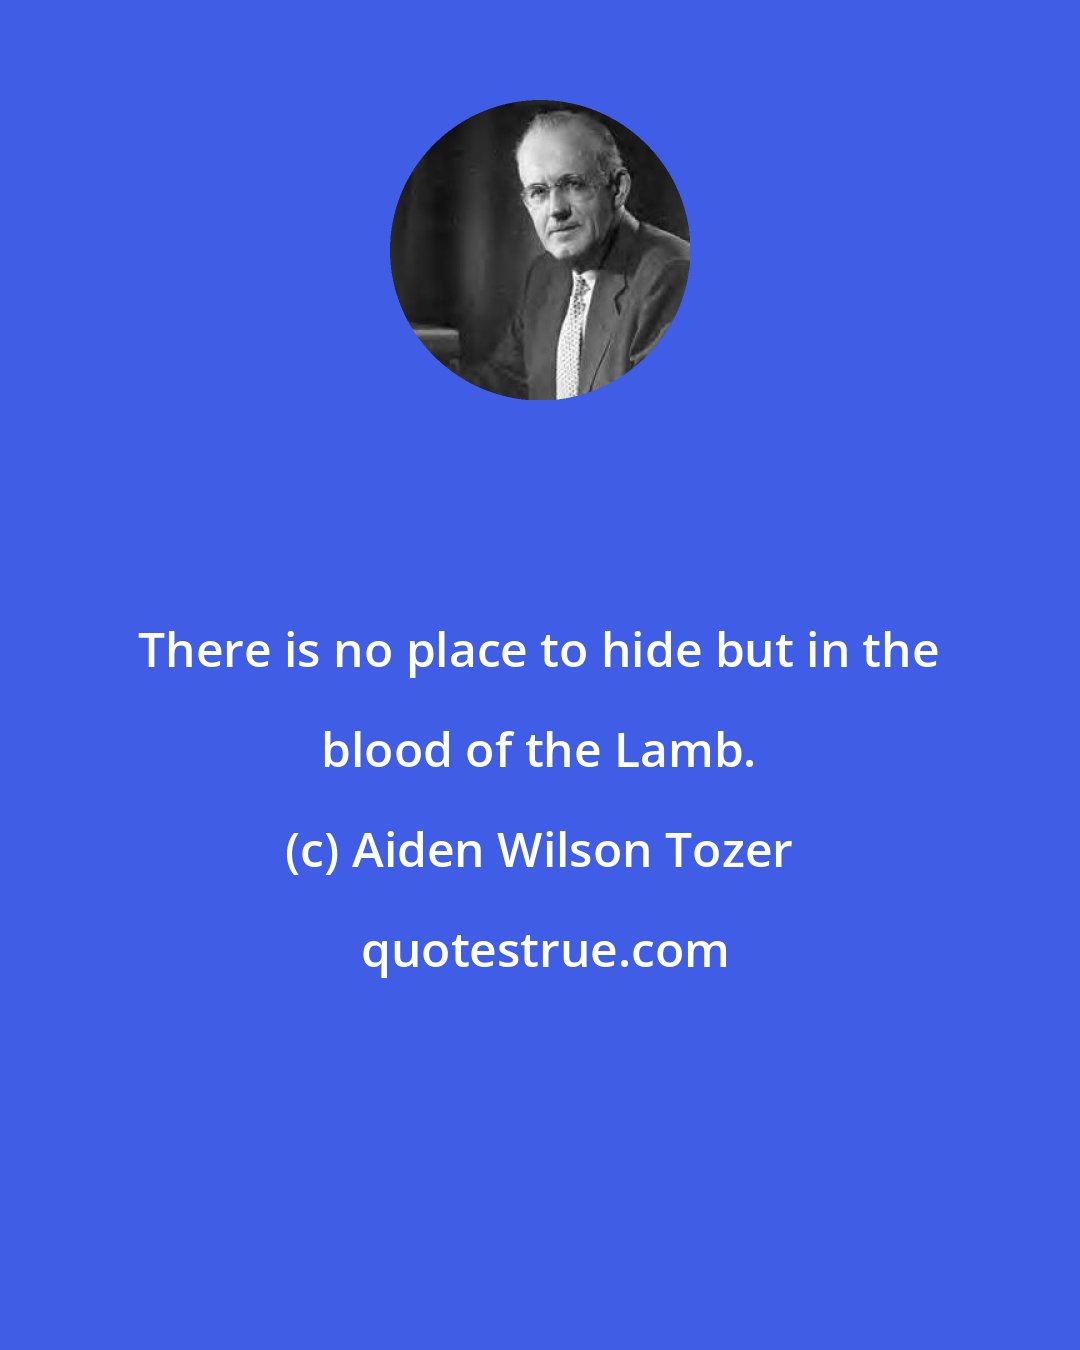 Aiden Wilson Tozer: There is no place to hide but in the blood of the Lamb.